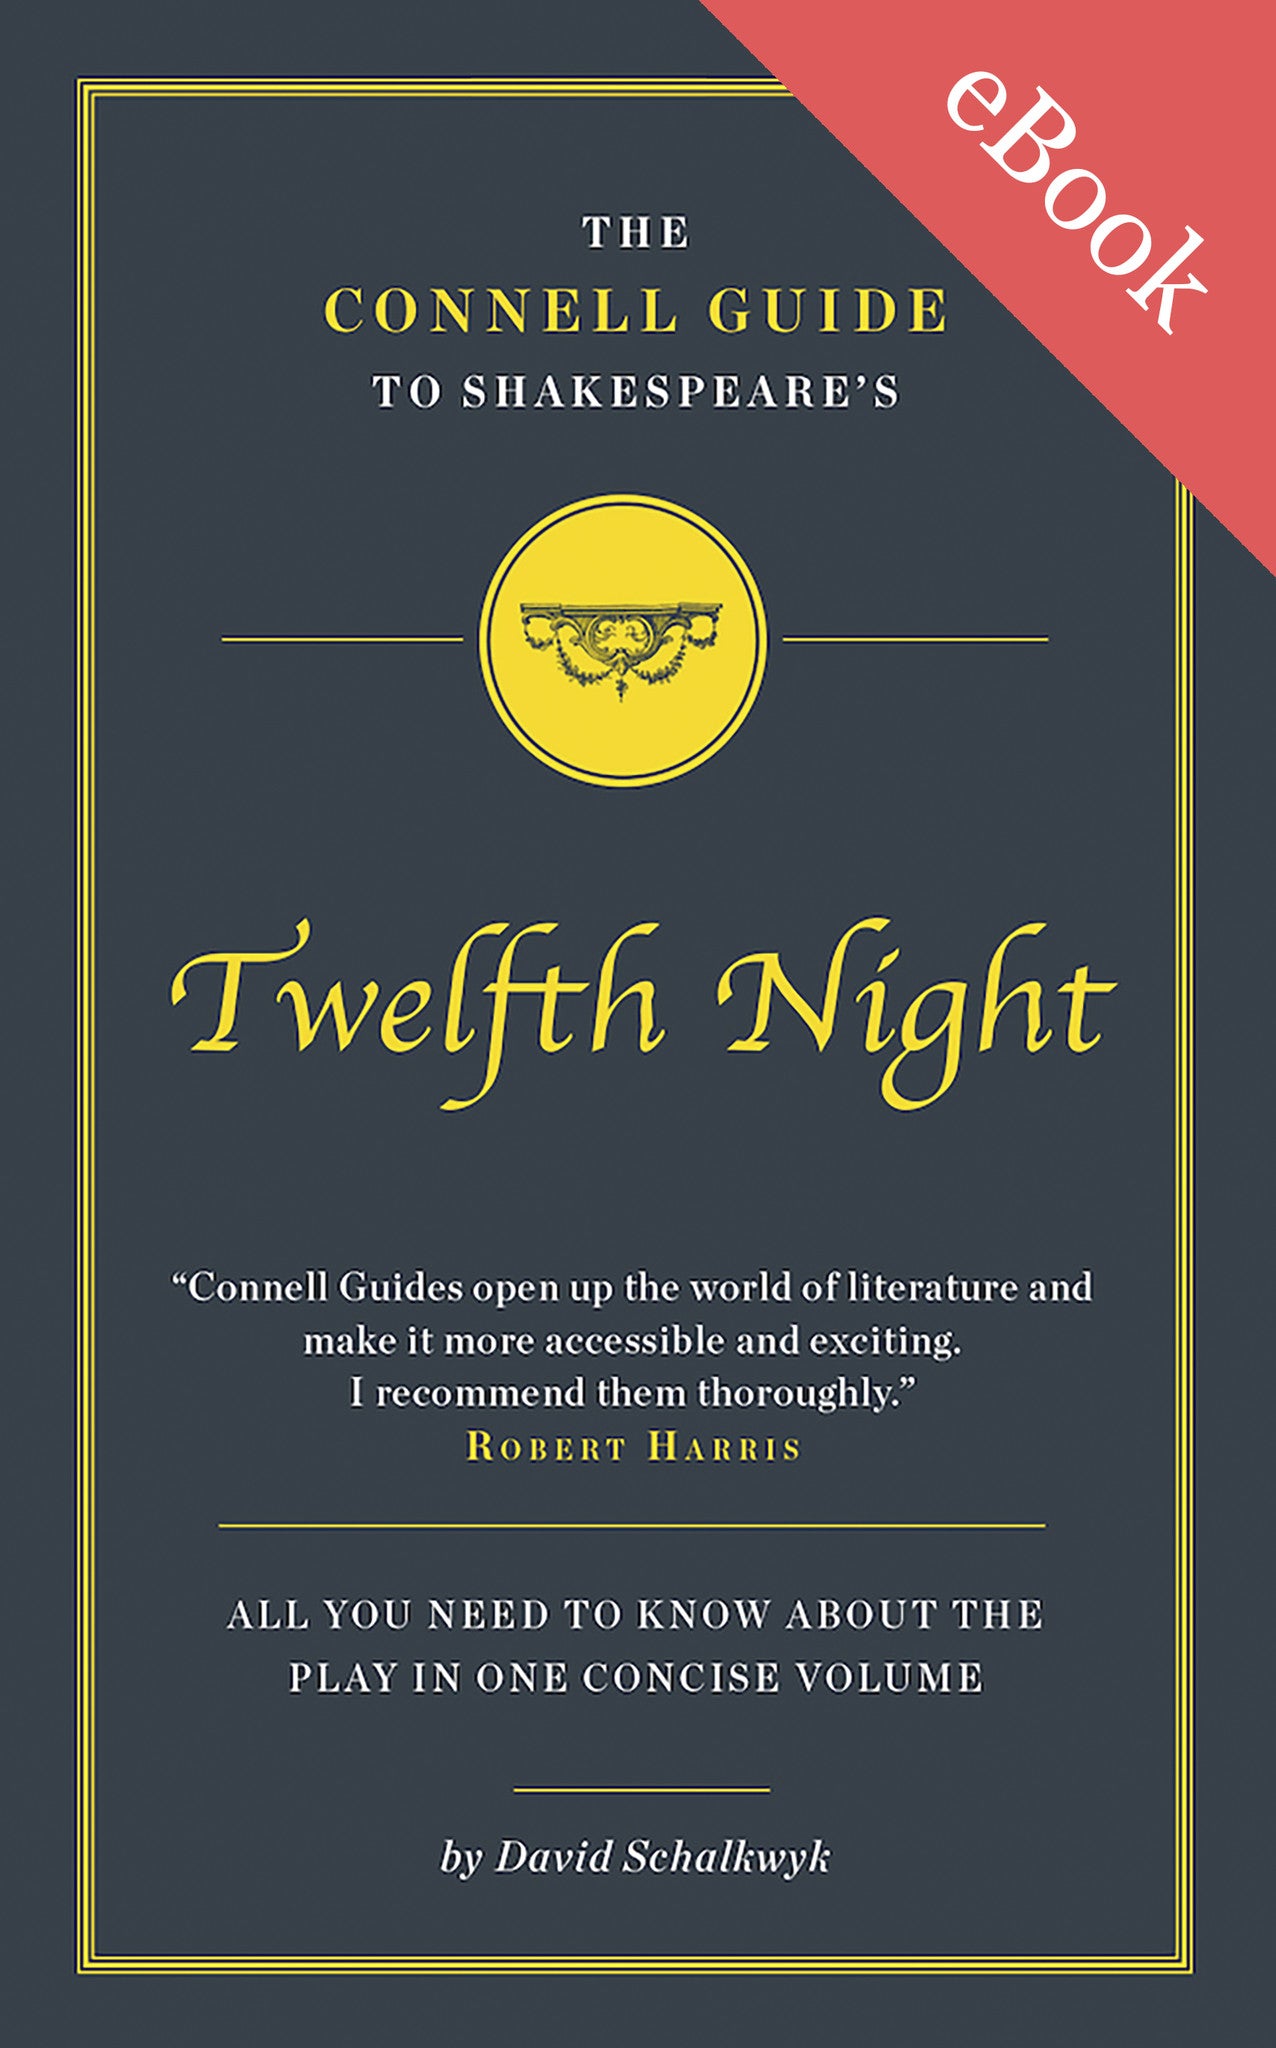 The Connell Guide to Twelfth Night